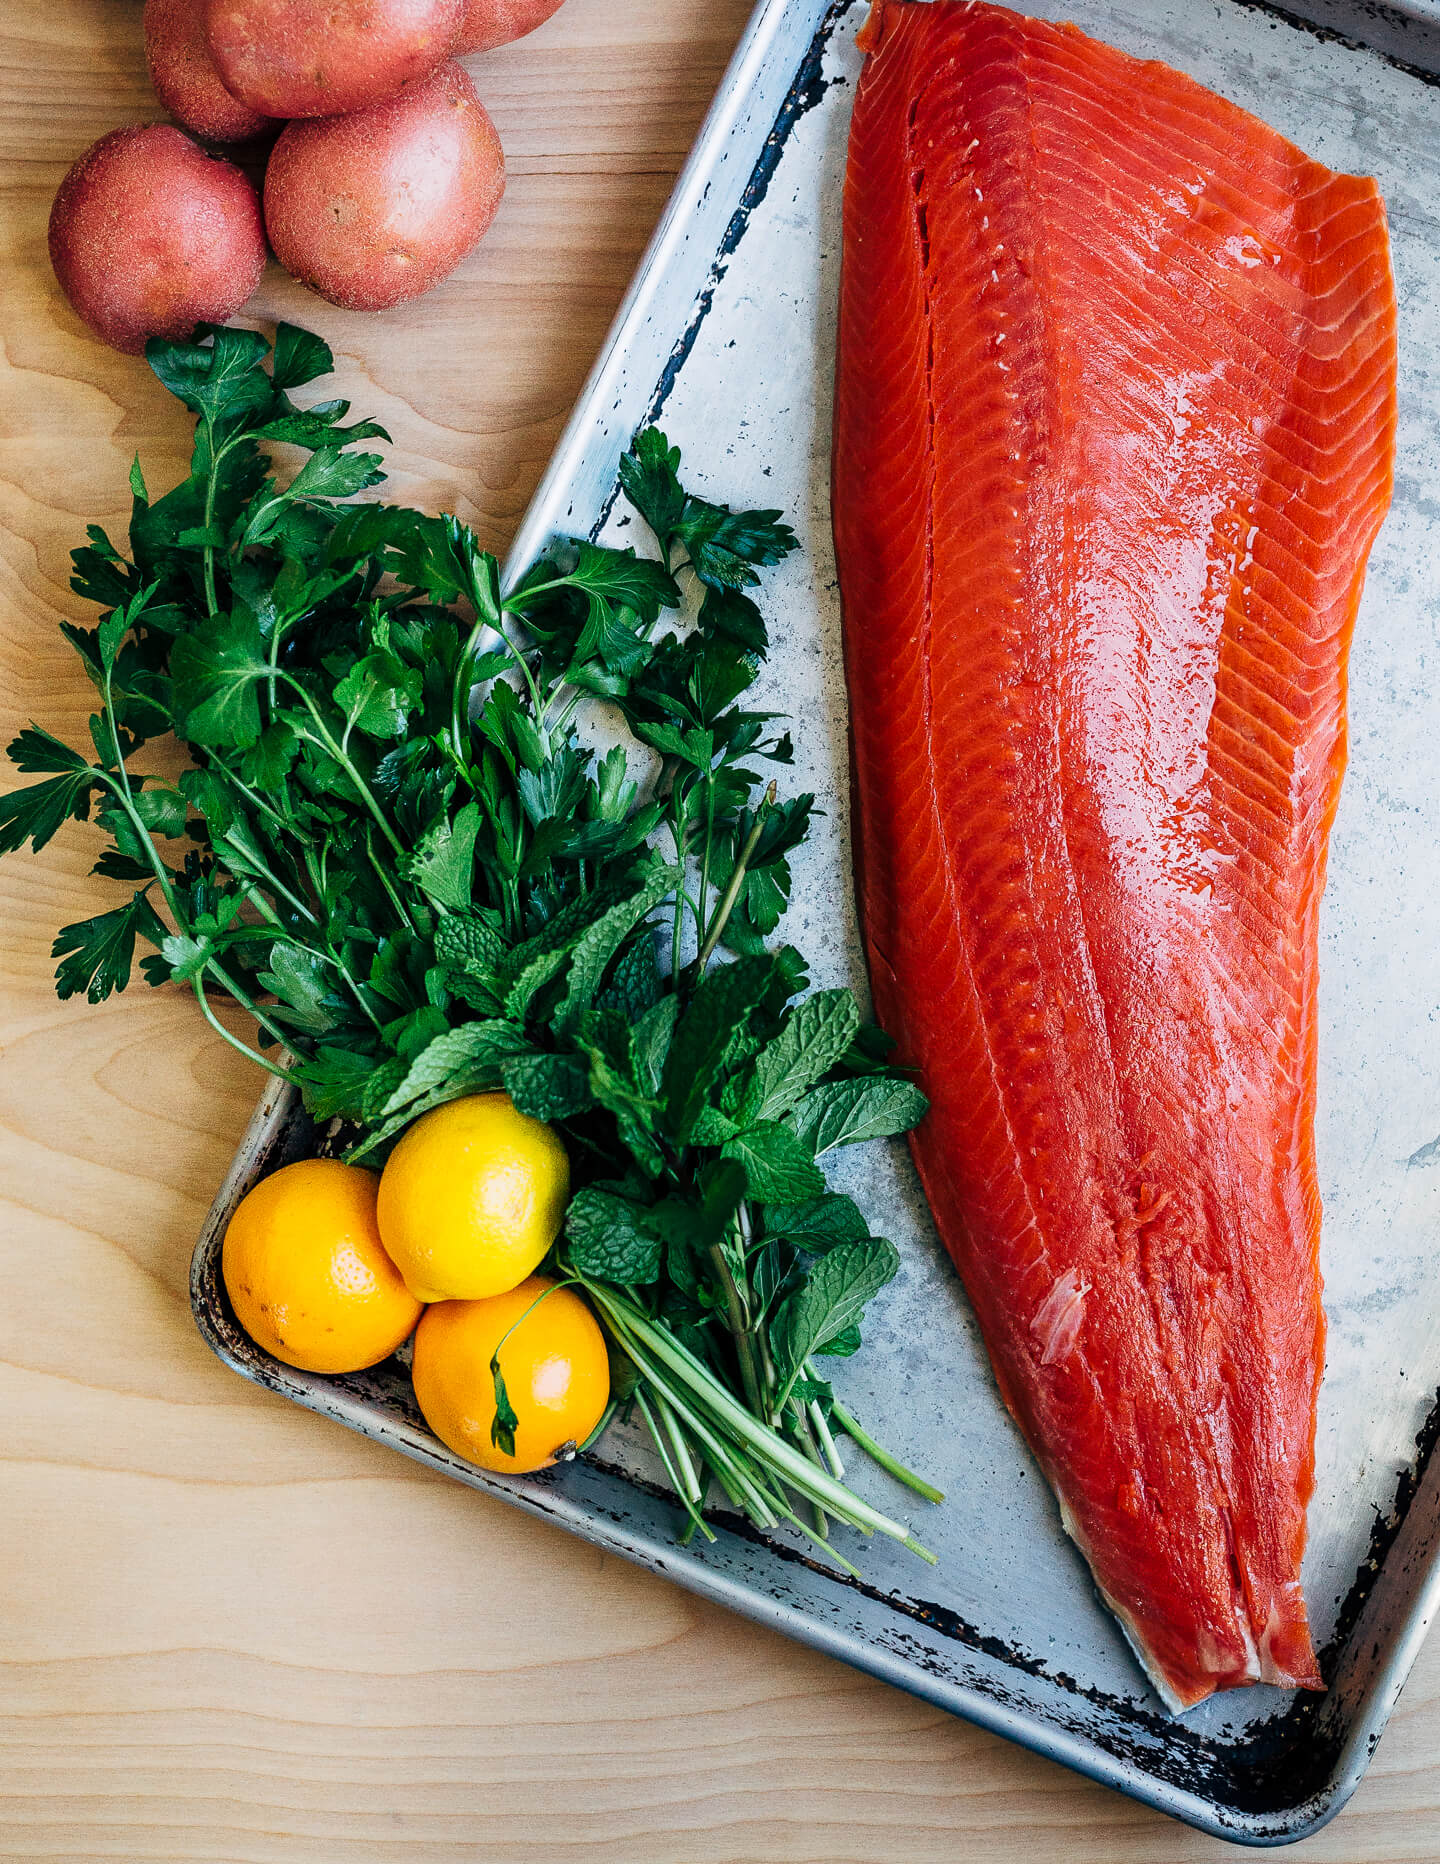 Broiled salmon fillets with a vibrant Meyer lemon and mint chimichurri makes for a simple, yet elevated mid-winter meal that's perfect for a Valentine's dinner at home. 